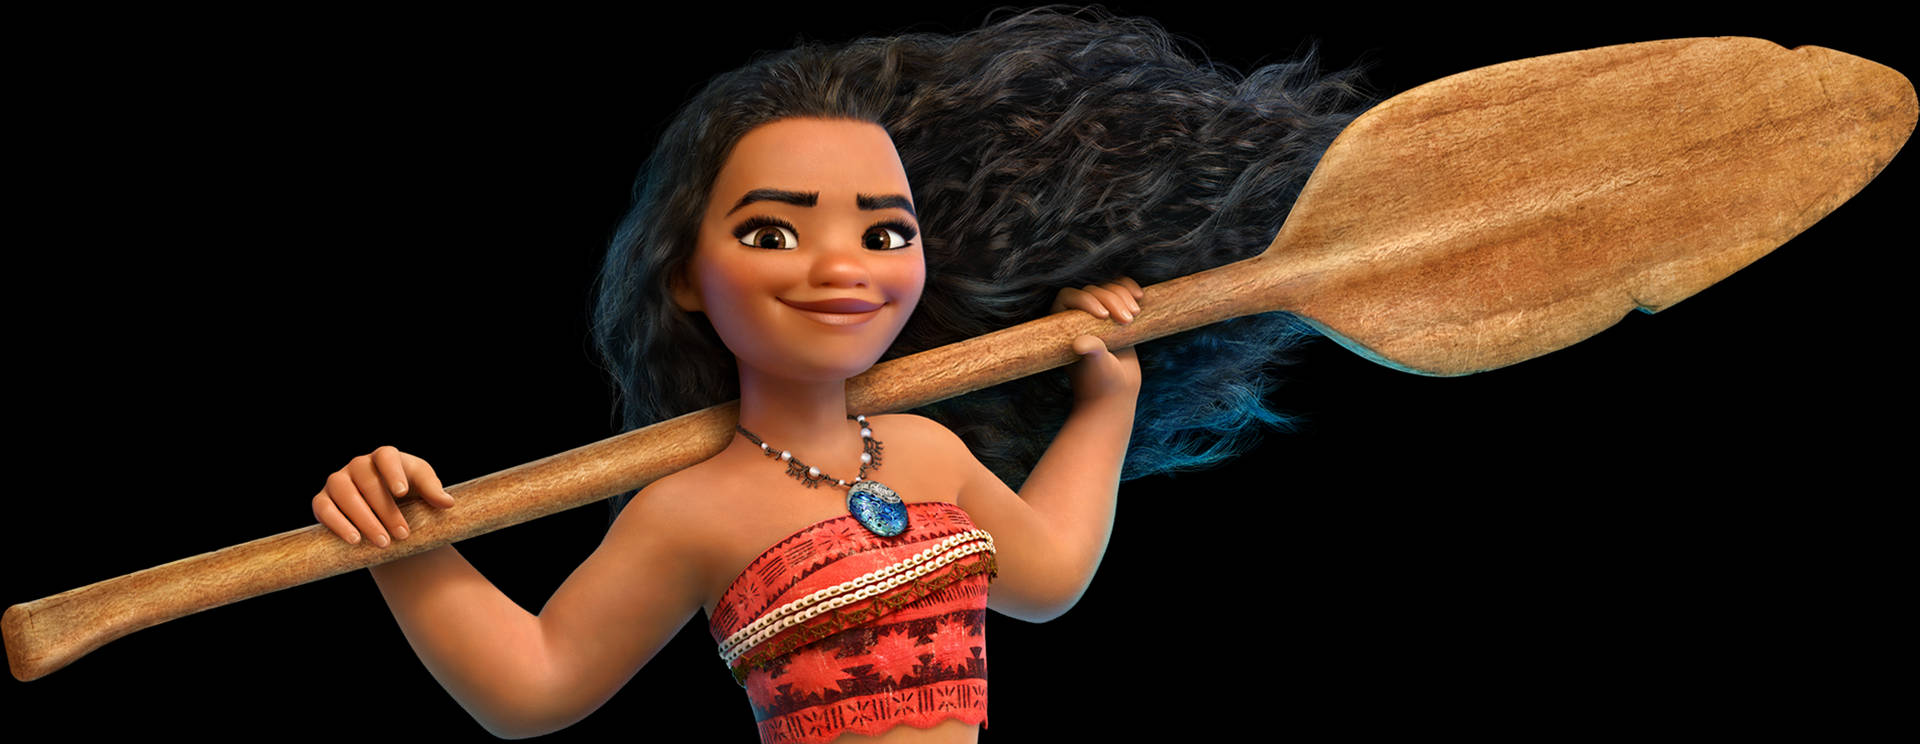 Moana 2081X806 Wallpaper and Background Image